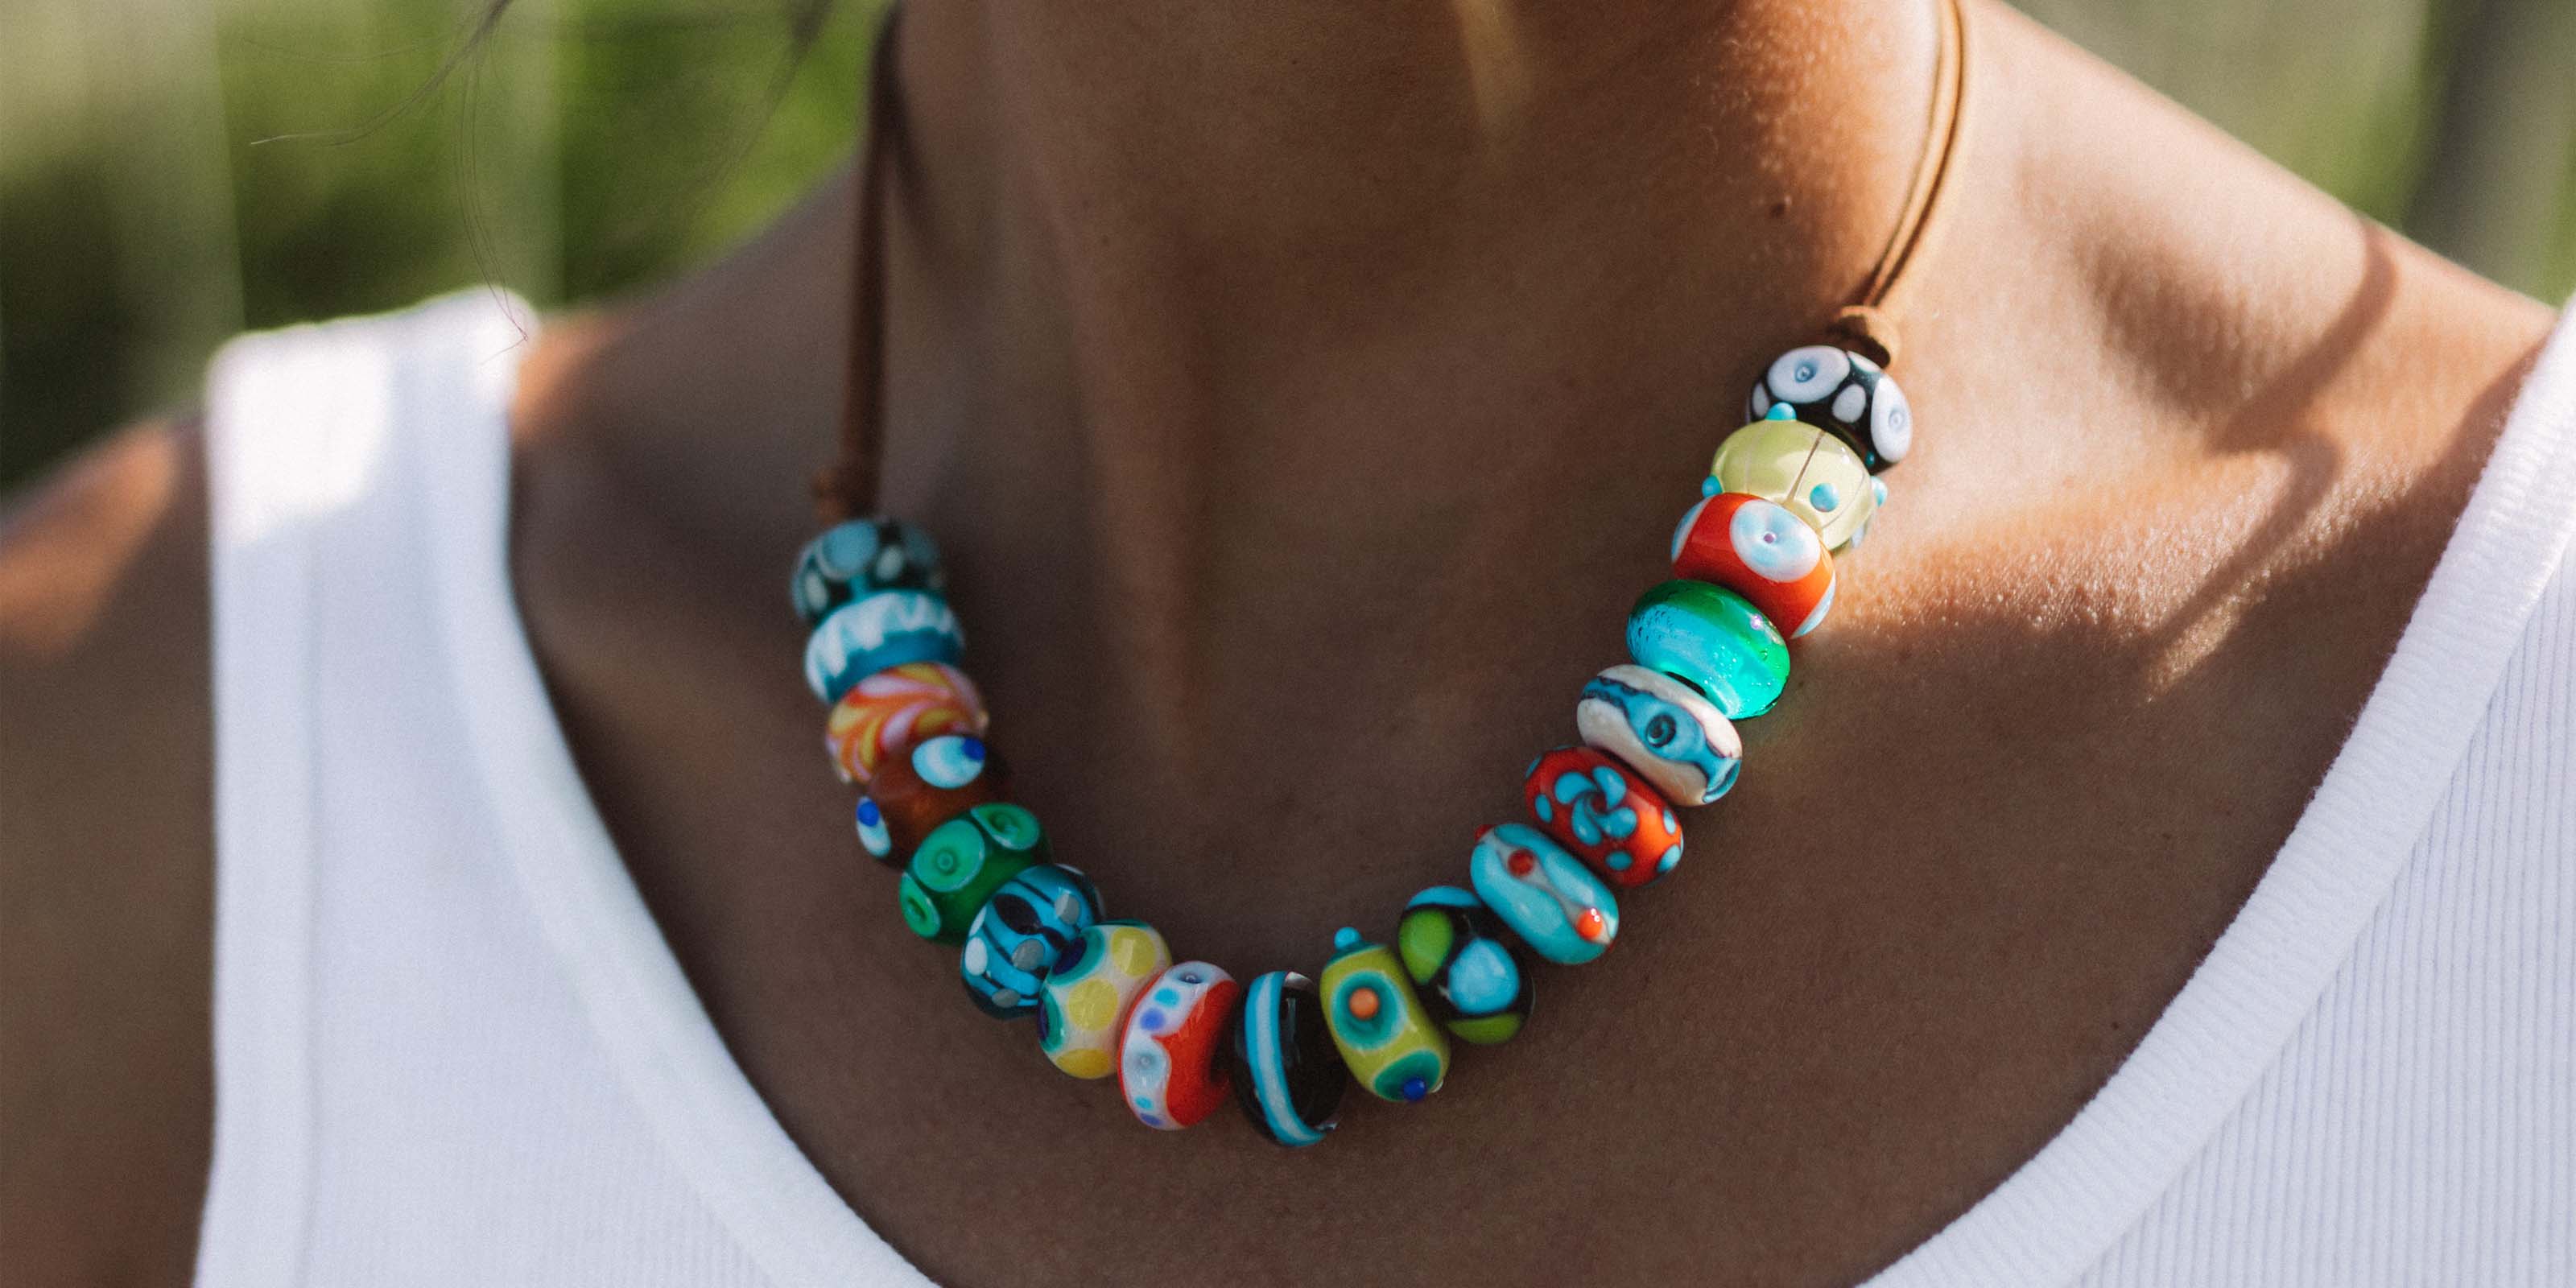 Multicolour glass beads strung on cord necklace worn by surf girl at the beach.